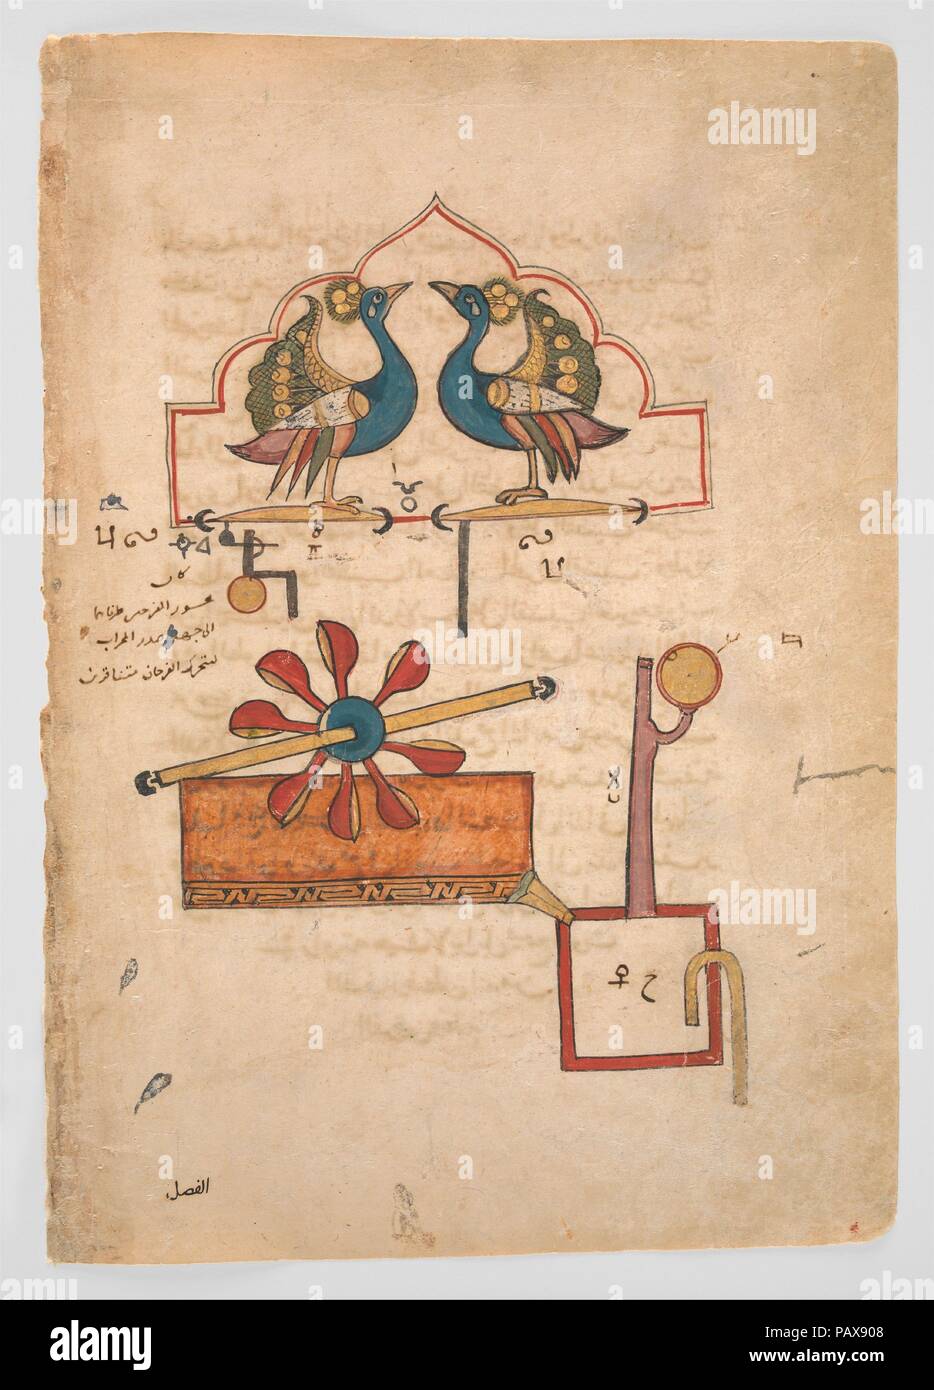 'Design for the Water Clock of the Peacocks', from the Kitab fi ma'rifat al-hiyal al-handasiyya (Book of the Knowledge of Ingenious Mechanical Devices) by Badi' al-Zaman b. al Razzaz al-Jazari. Author: Badi' al-Zaman ibn al-Razzaz al-Jazari (1136-1206). Dimensions: H. 12 3/8 in. (31.4 cm)  W. 8 11/16 in. (22.1 cm). Date: dated A.H. 715/A.D. 1315.  Al-Jazari, the author of this treatise on a variety of practical and fanciful mechanical devices, served at the Artuqid court in Diyar Bakr in the late eleventh to the early twelfth century. Some of the elements of the peacock clock, run by water, ar Stock Photo